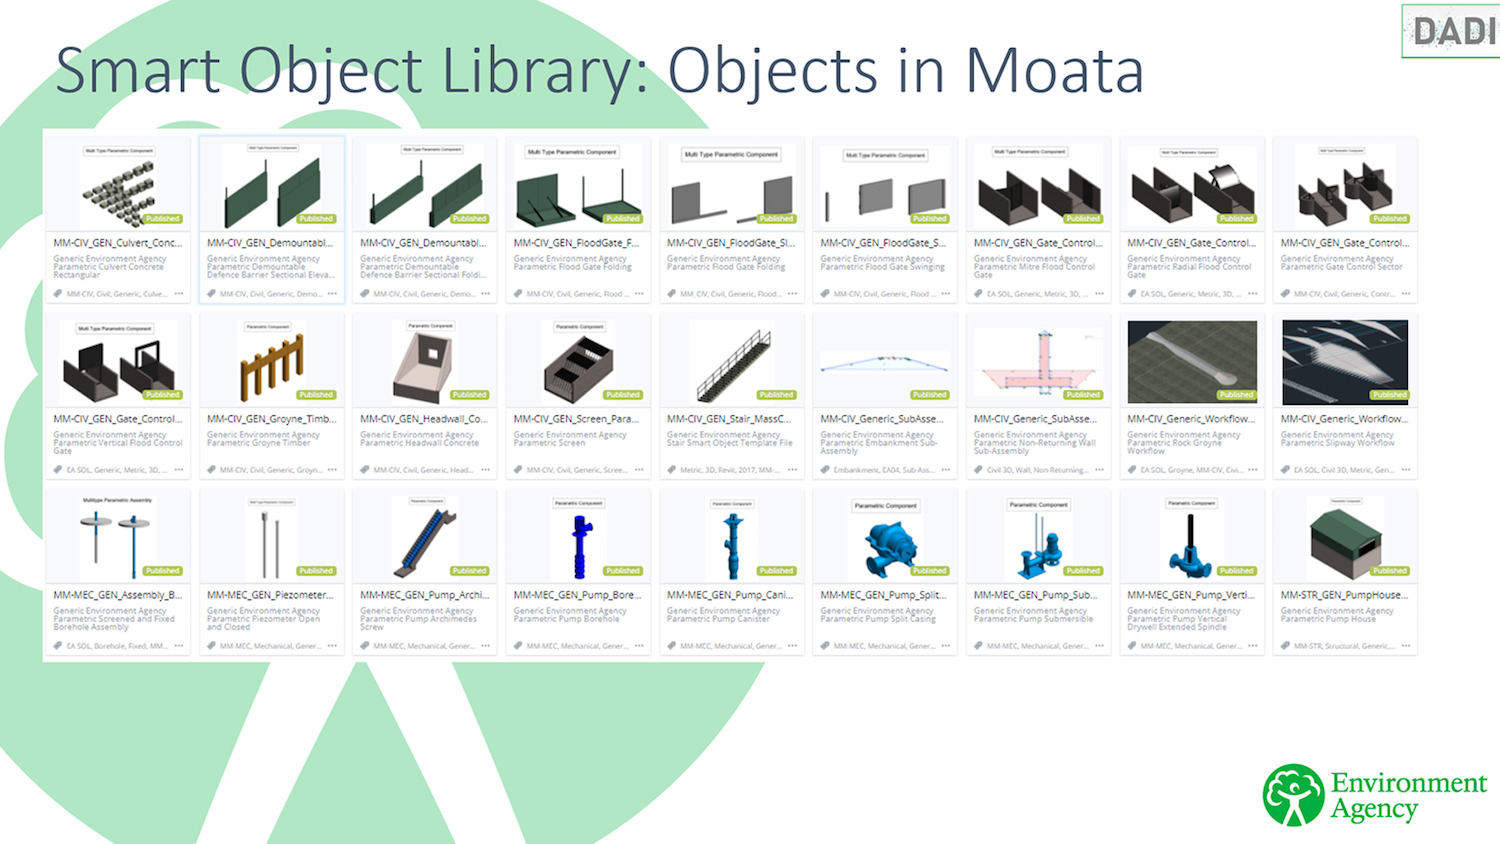 Component-based design: Mott MacDonald's Moata smart object library, designed for the Environment Agency